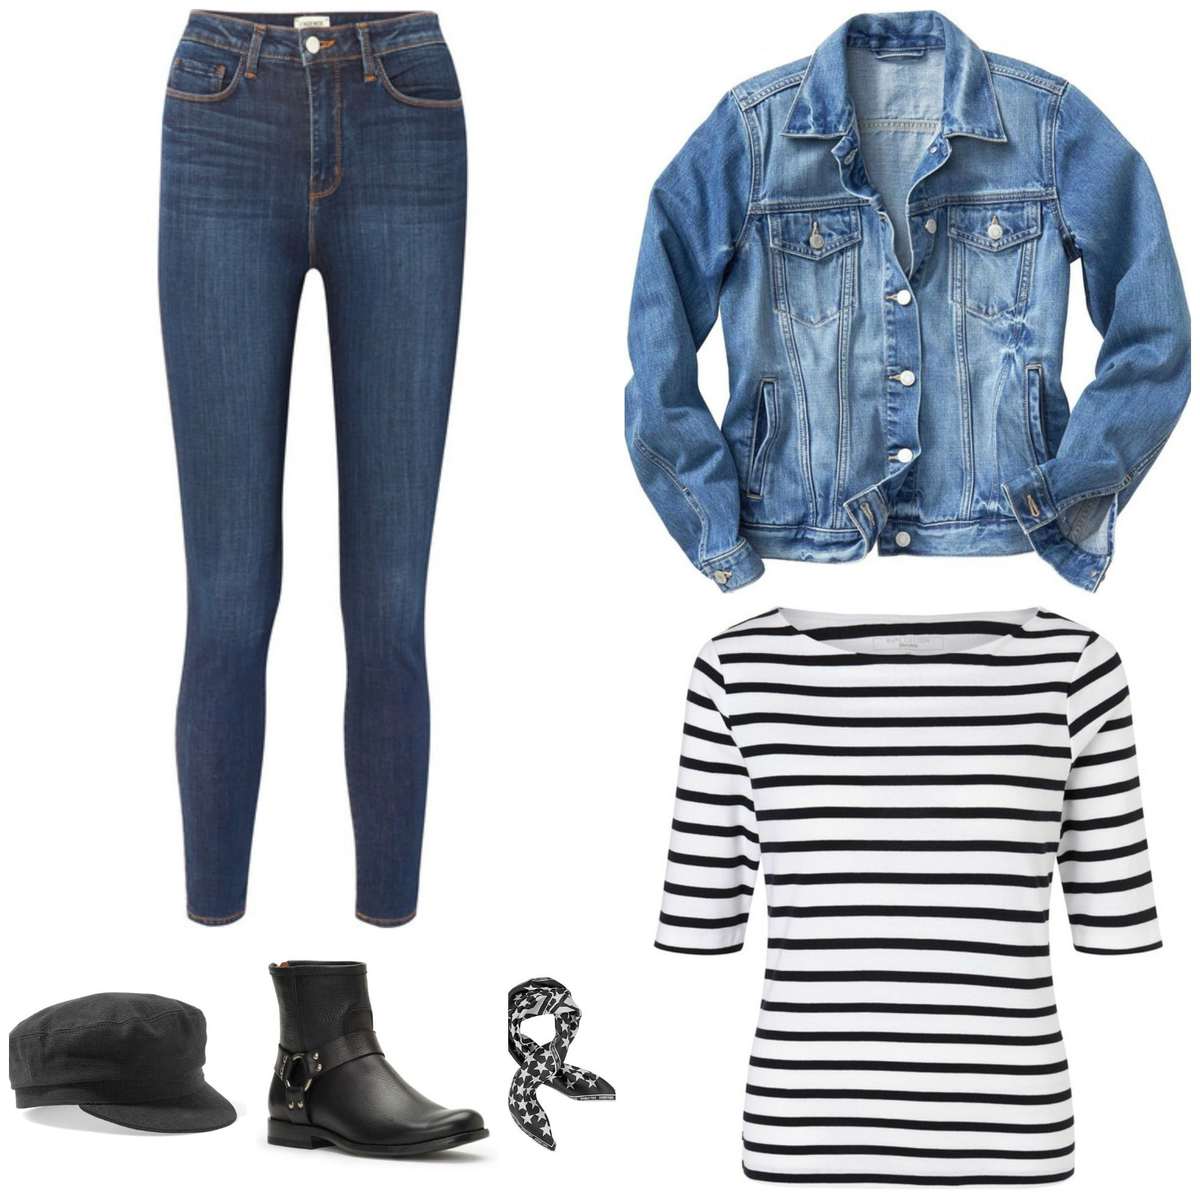 Casual weekend or work from home outfit featuring stretchy skinny jeans, a denim jacket, Breton tee, black and white printed bandana, black harness boots, and black baker boy cap